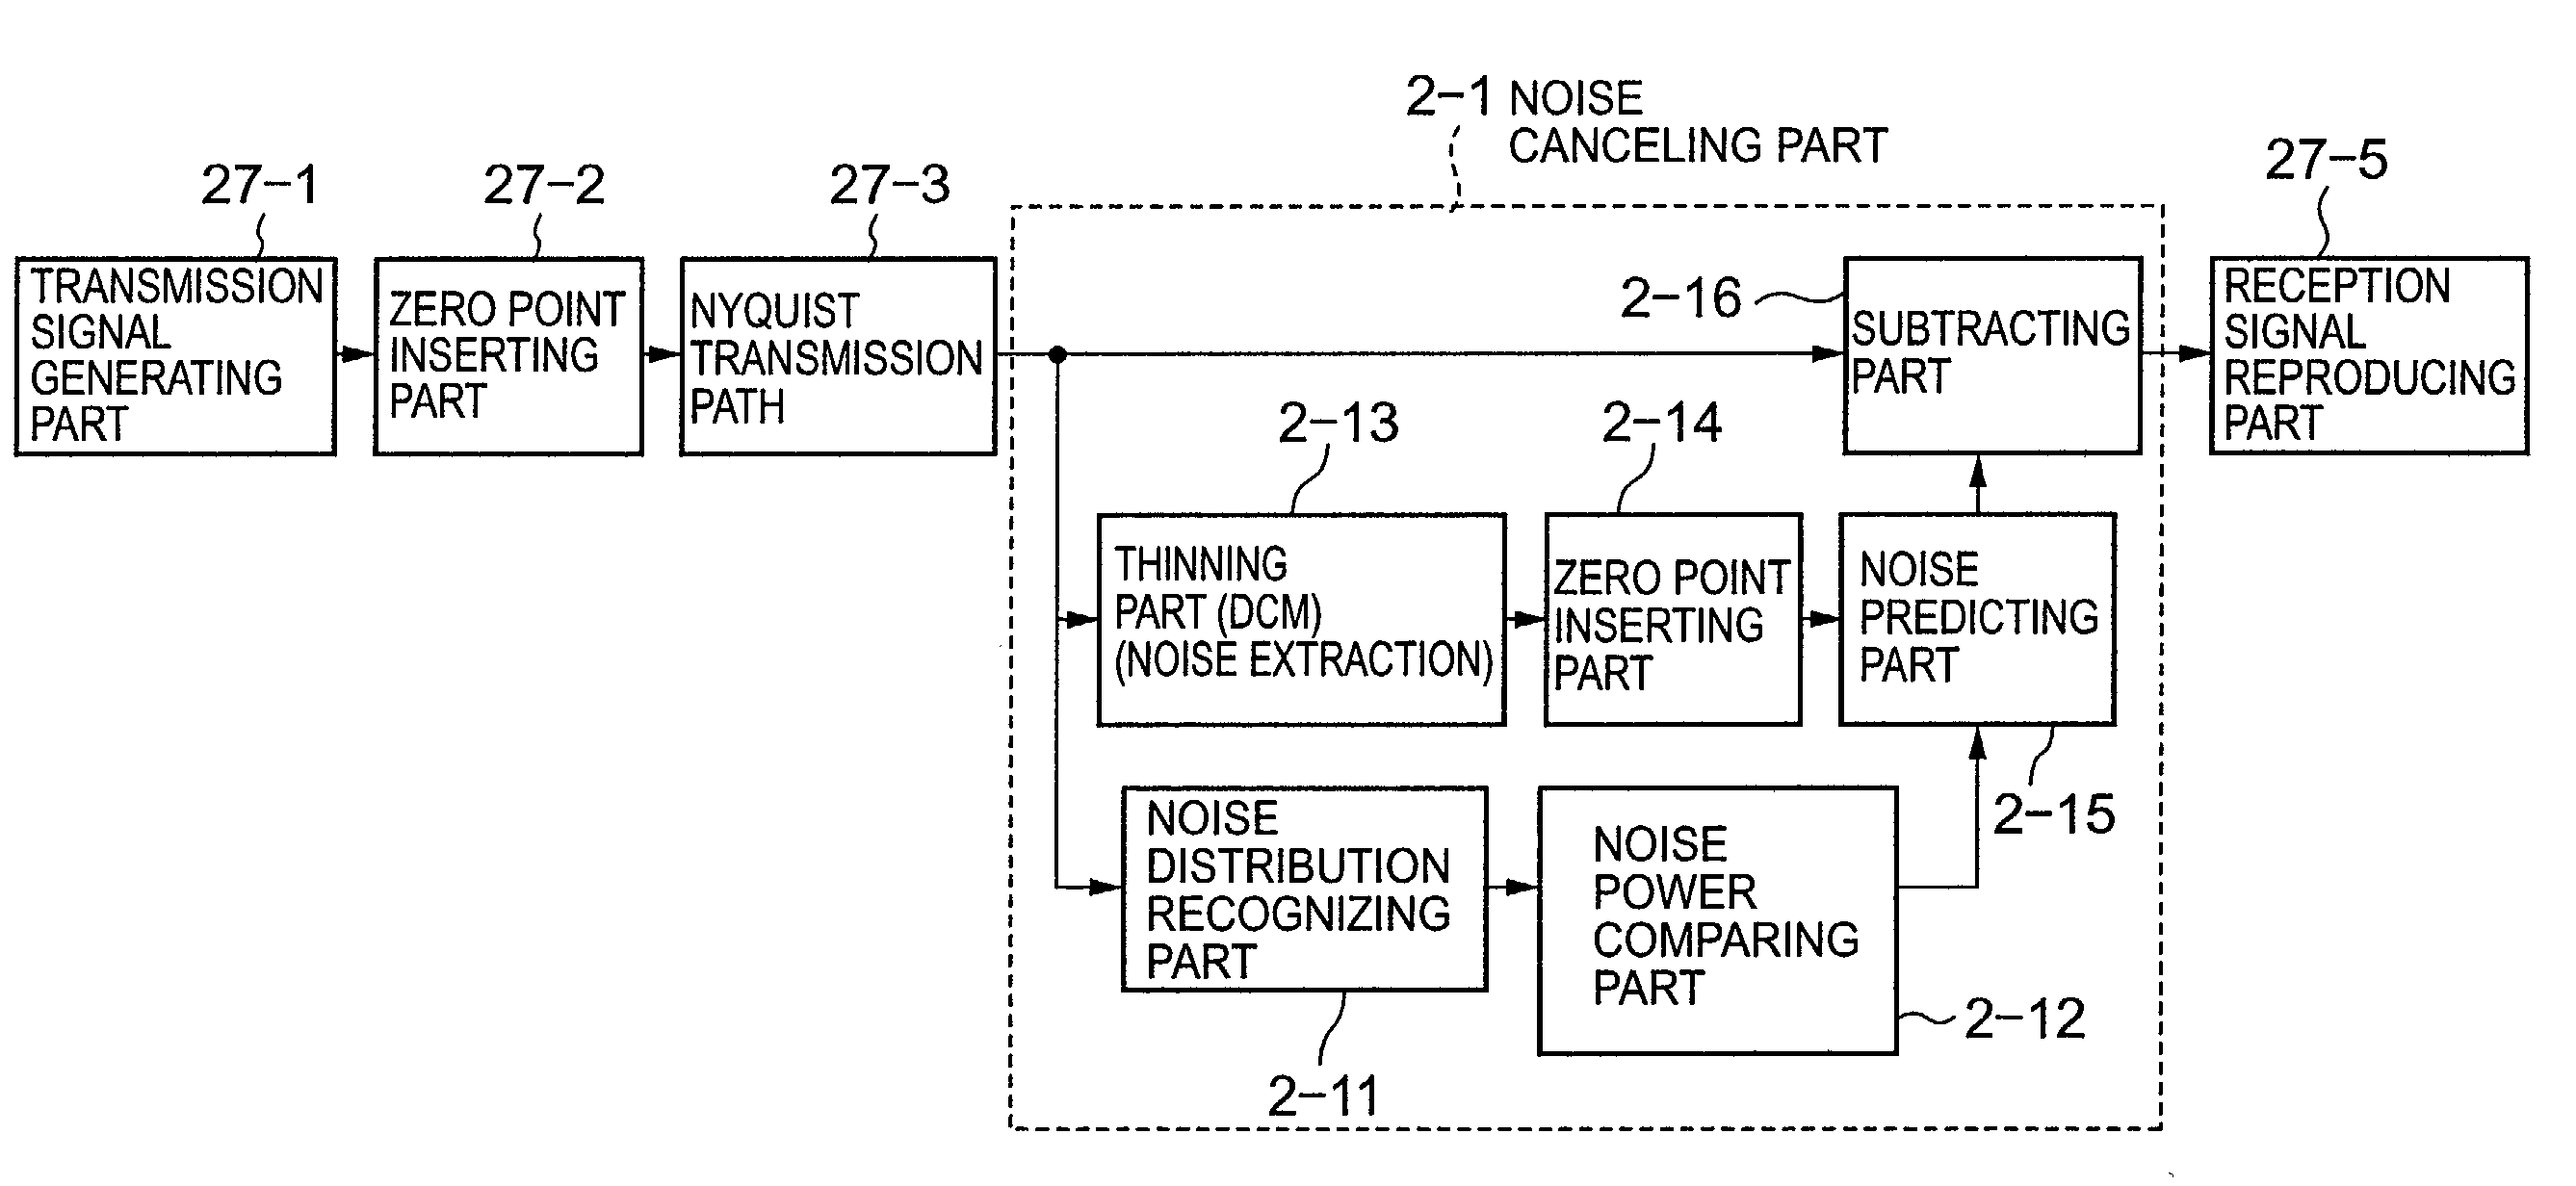 Noise canceling method and apparatus